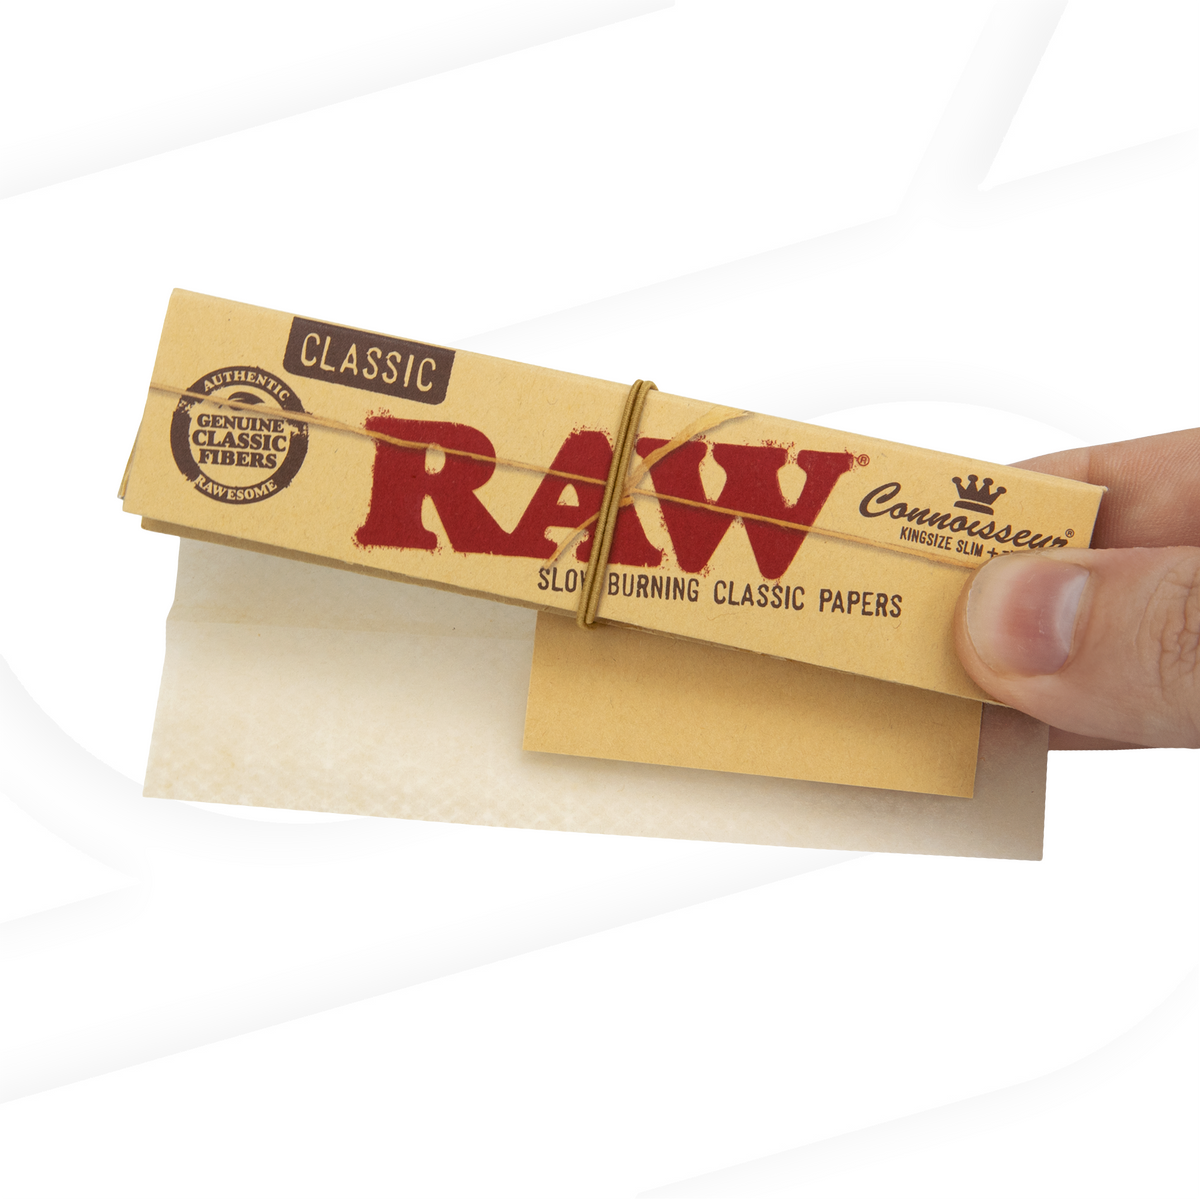 RAW Classic Connoisseur King Size Slim Rolling Papers Rolling Papers RAWB-RPCL-KL02_1/24 esd-official